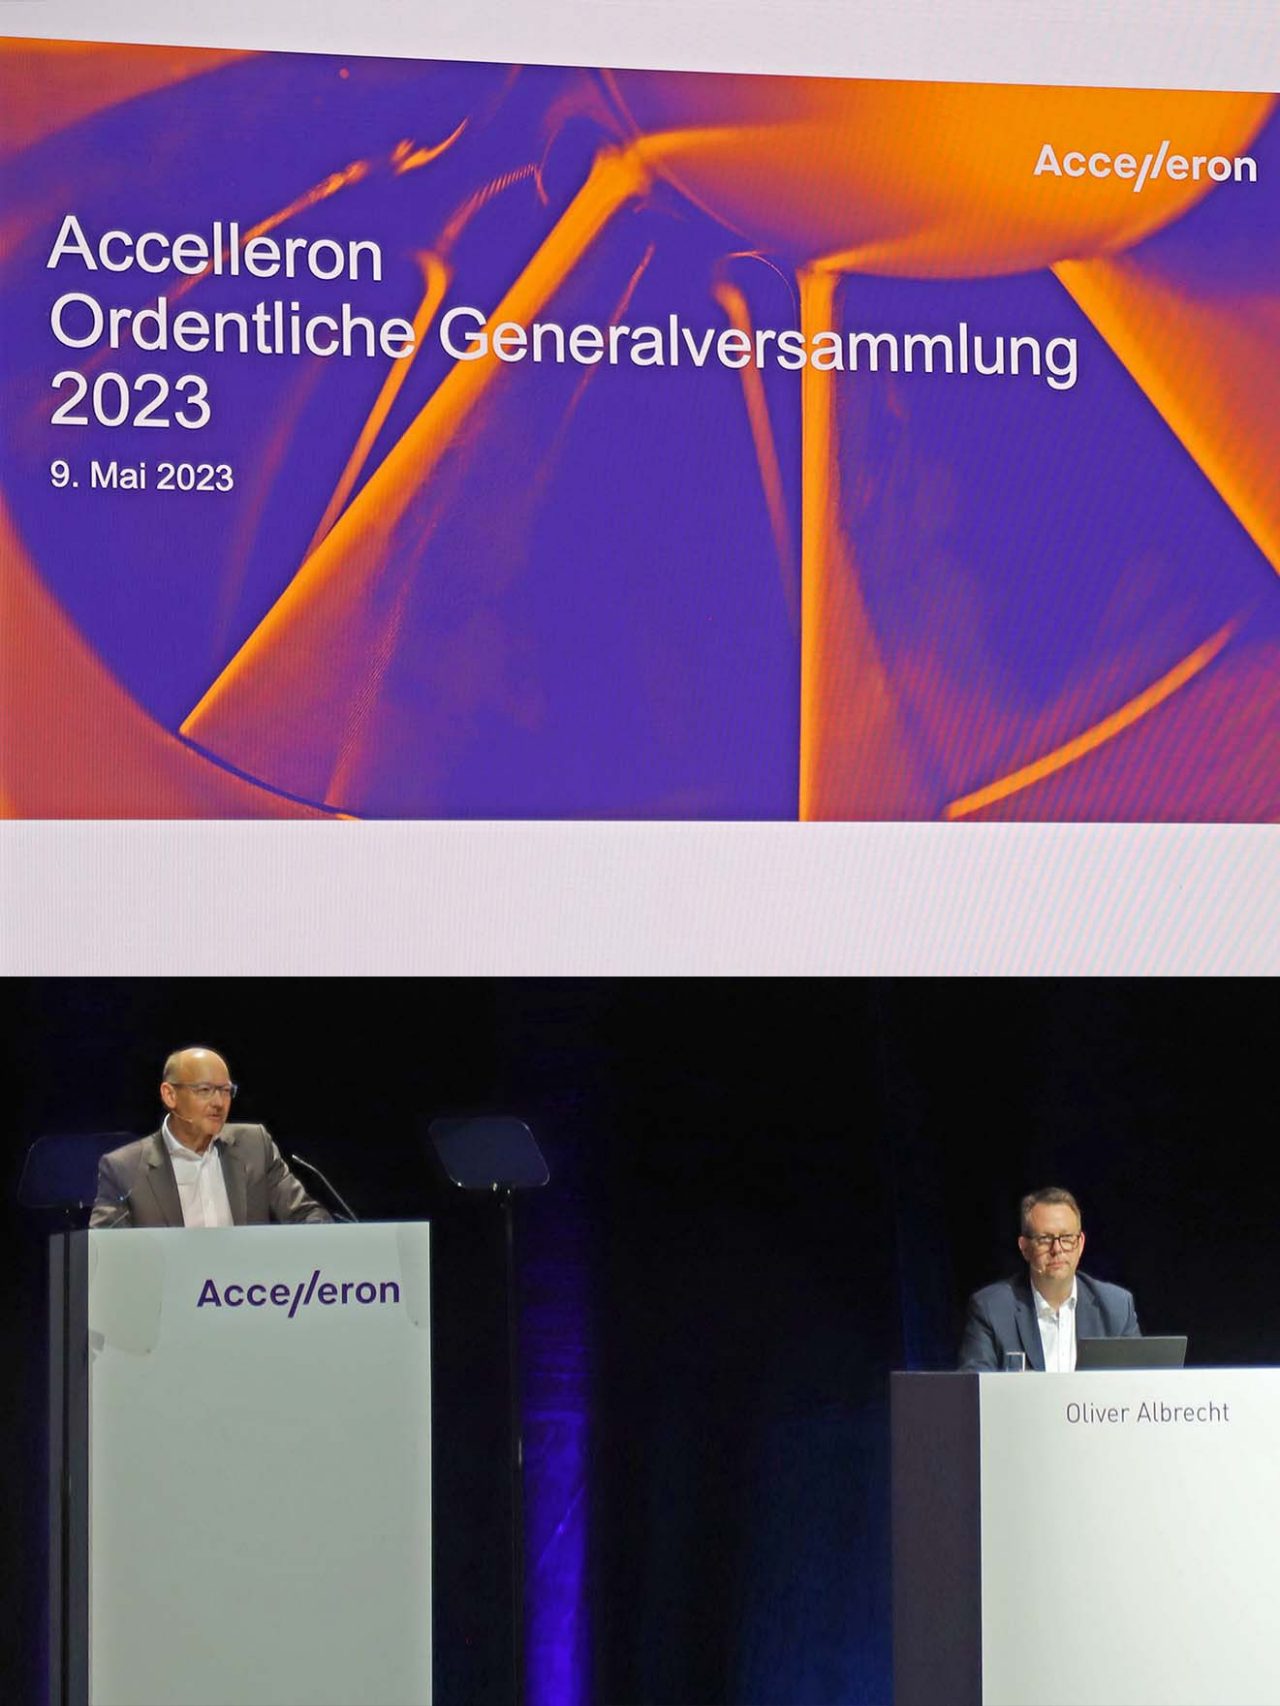 Accelleron General Assembly 2023